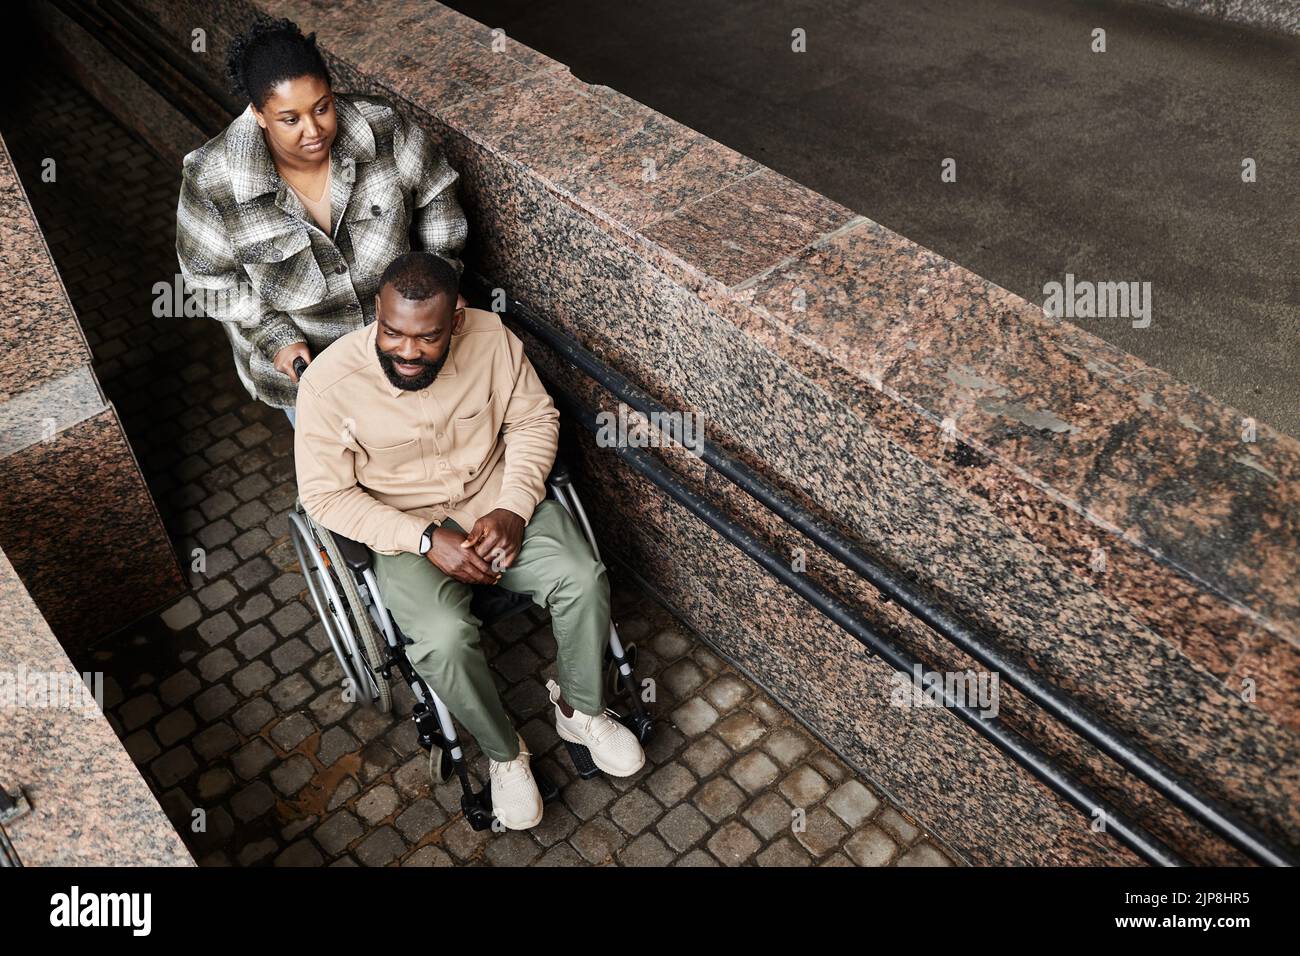 High angle portrait of black woman assisting partner in wheelchair going down ramp in city, copy space Stock Photo